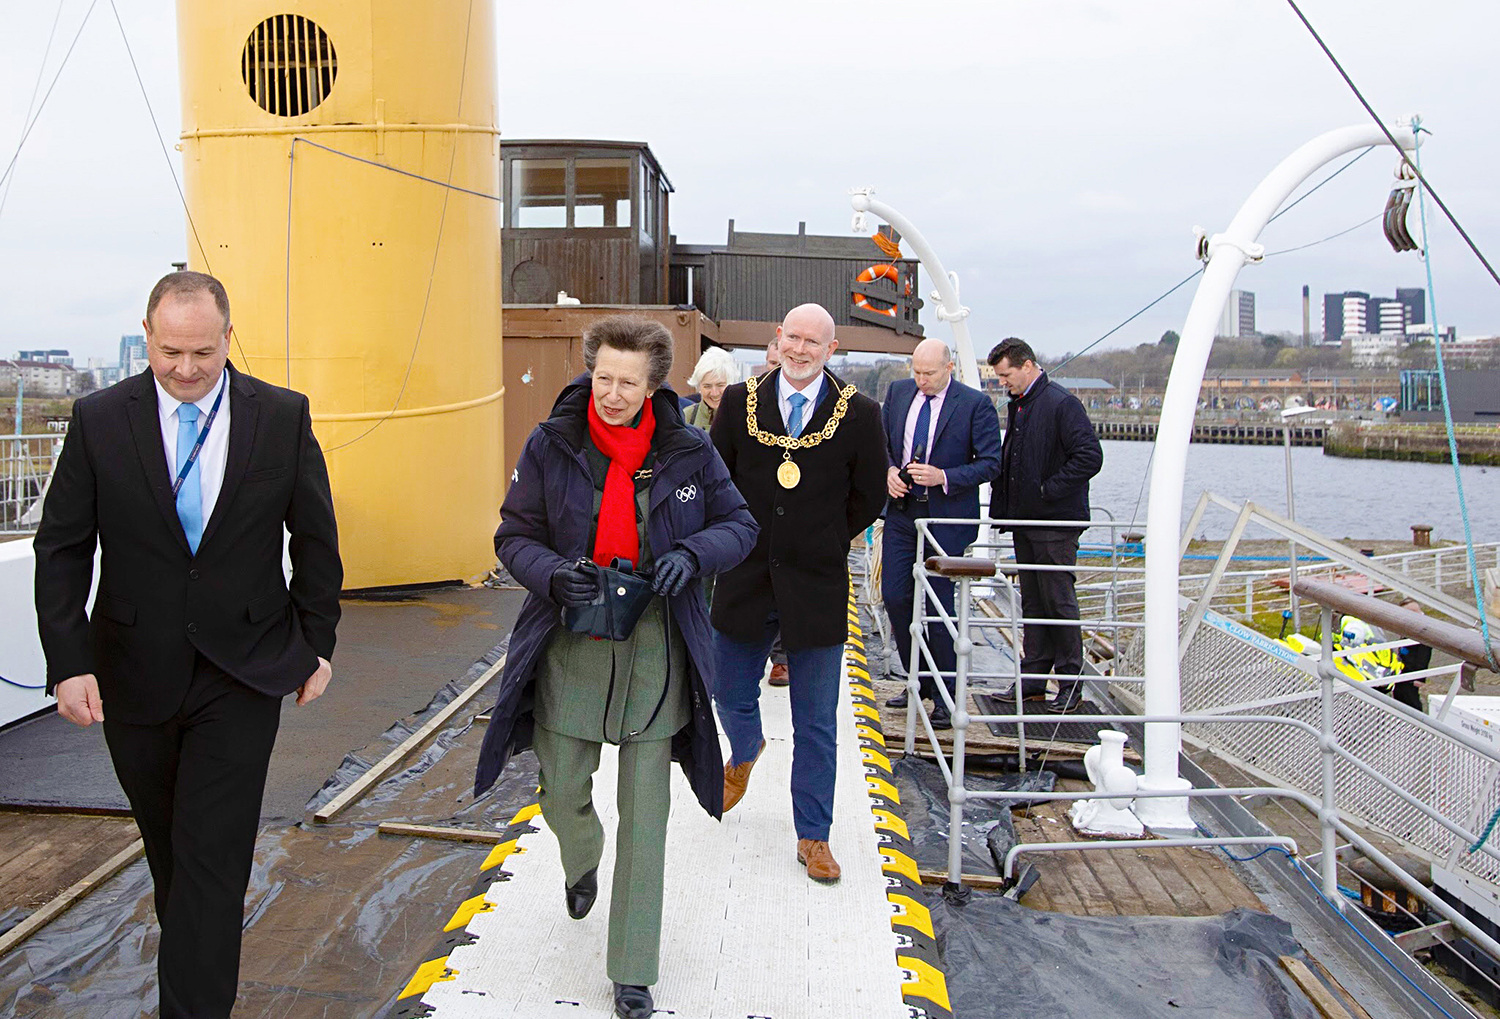 Image 1: Her Royal Highness, The Princess Royal visited the TS Queen Mary which is berthed in Glasgow [Source: Martin Shields]